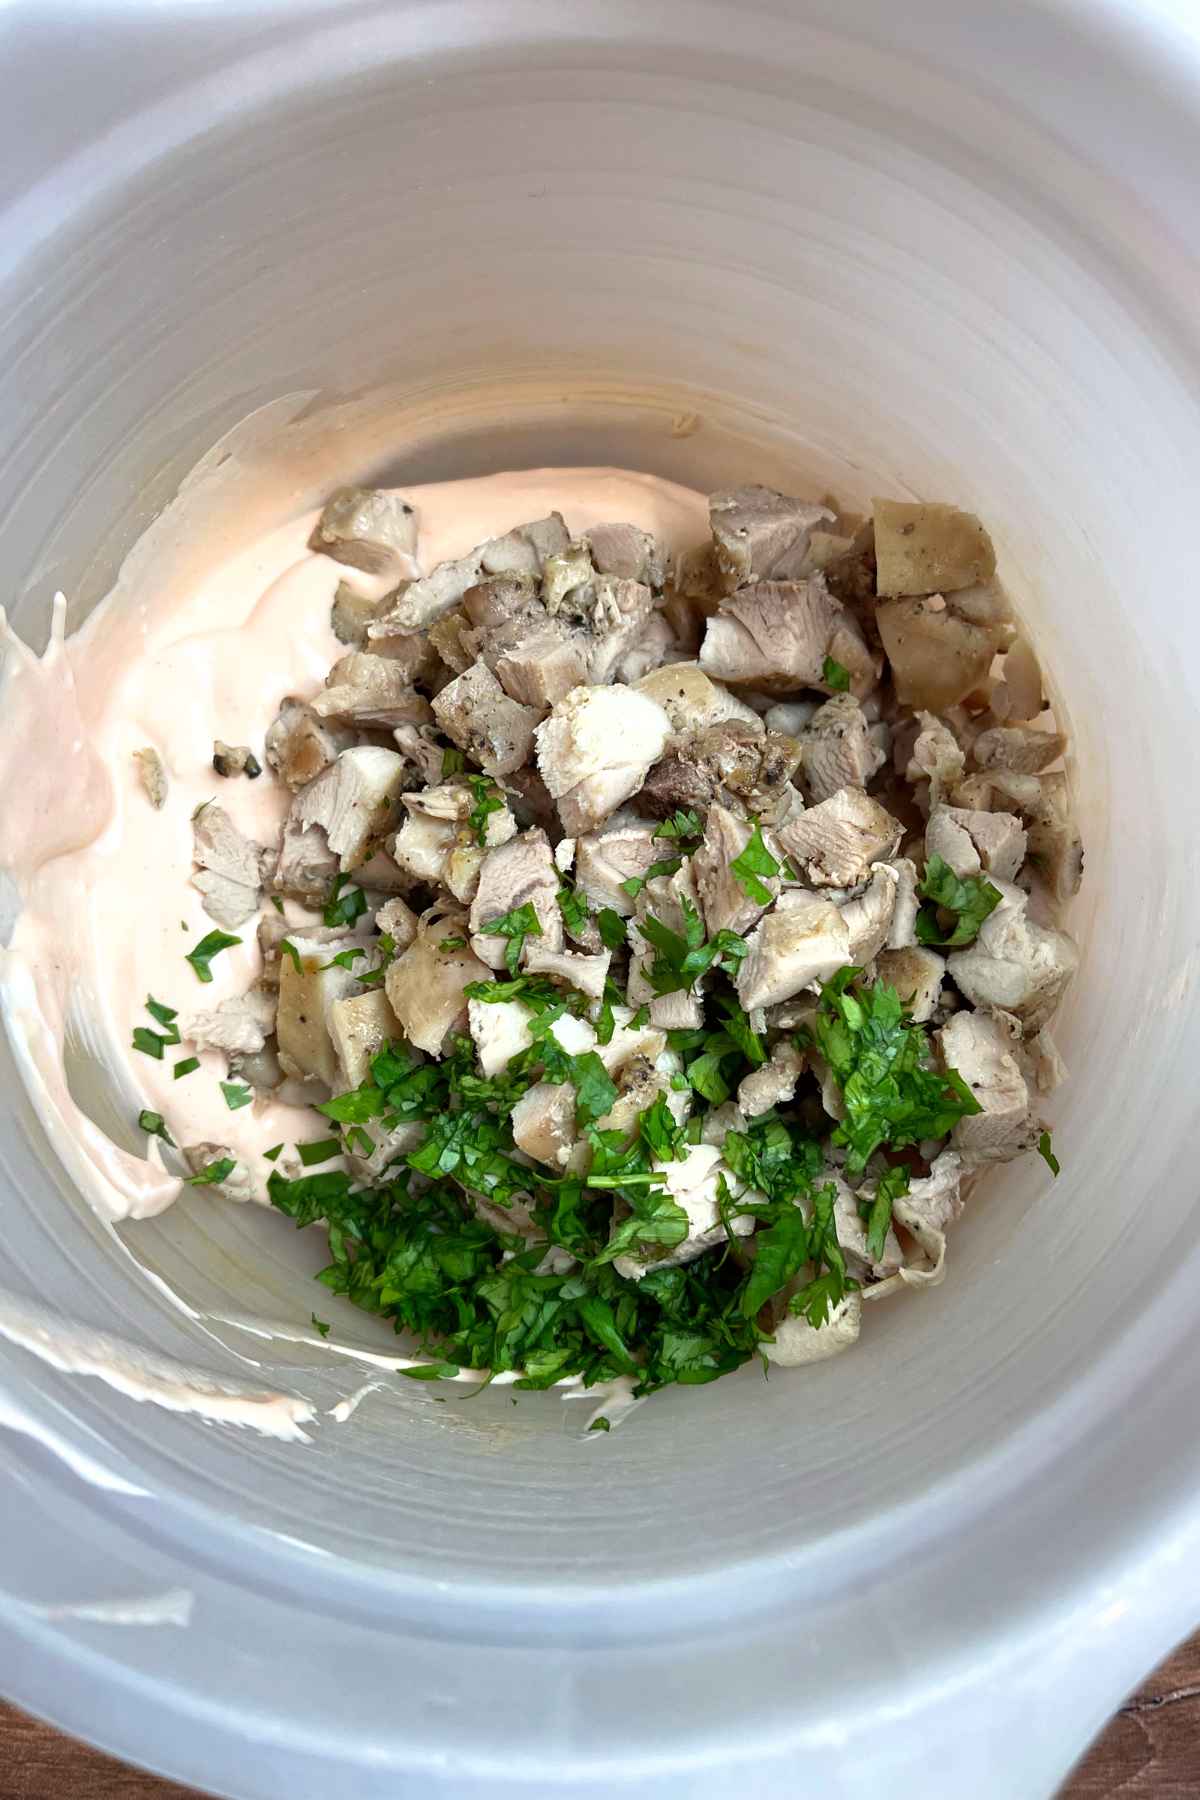 Chicken mixture in a mixing bowl.